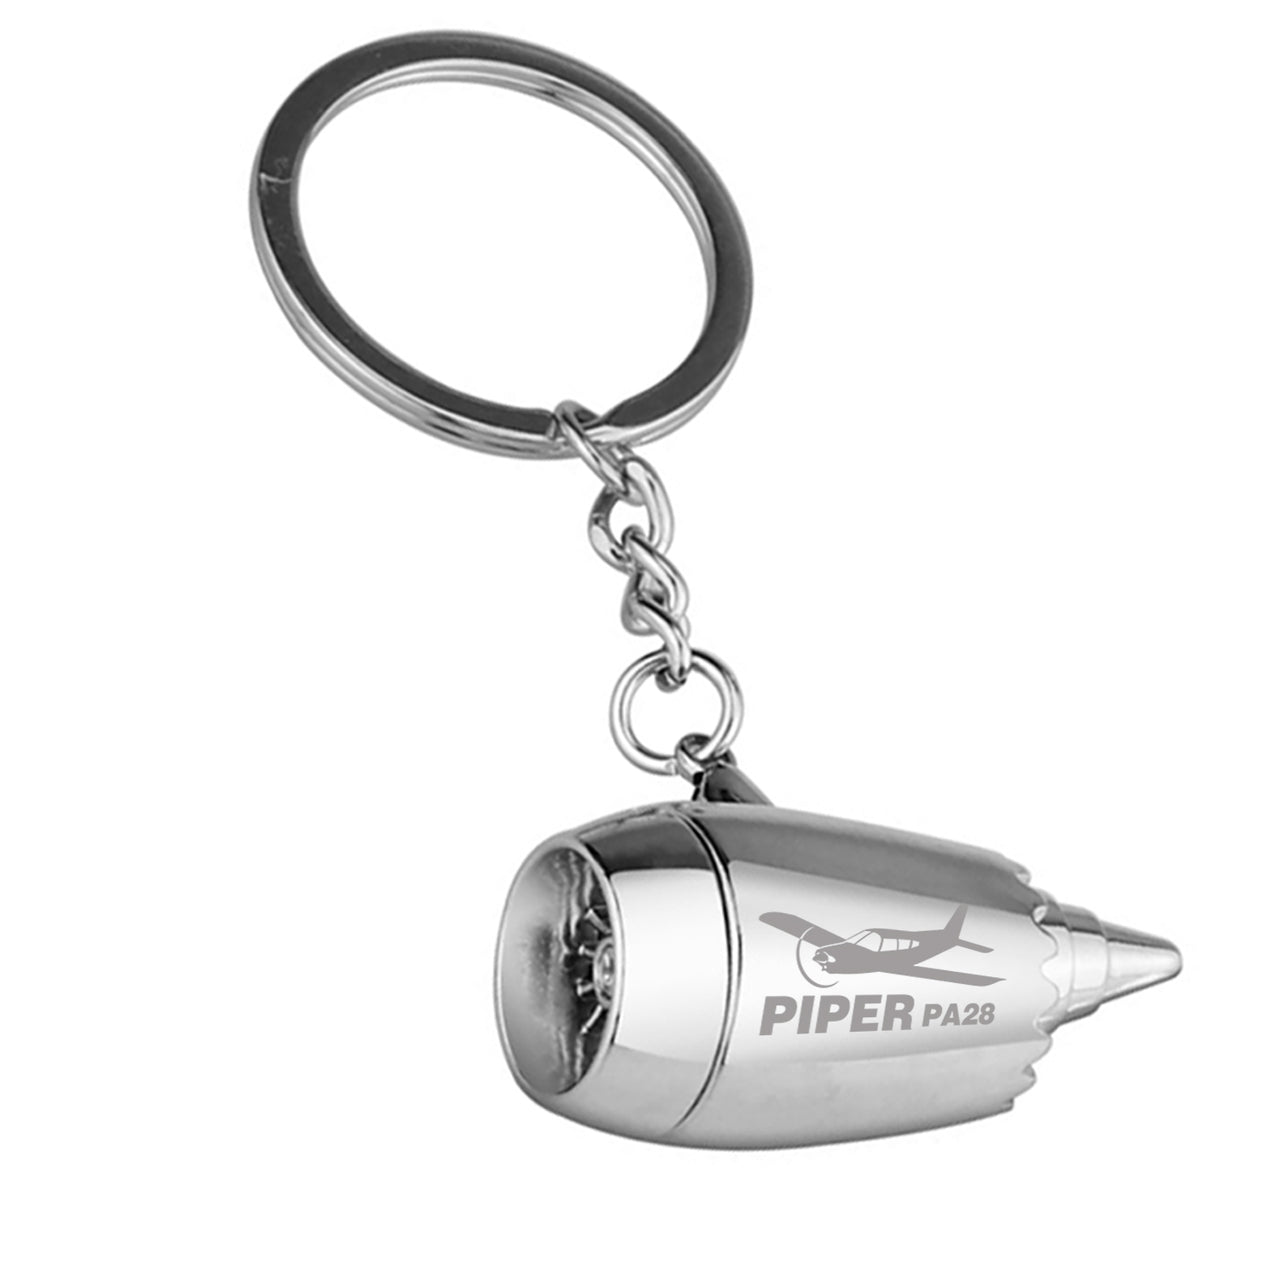 The Piper PA28 Designed Airplane Jet Engine Shaped Key Chain